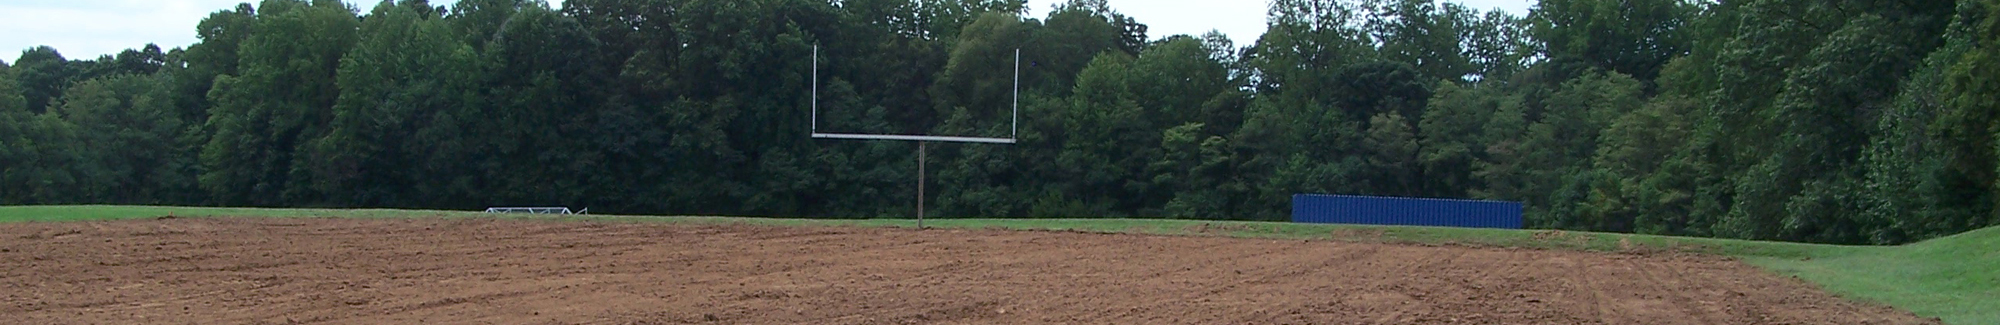 Repaired athletic field.